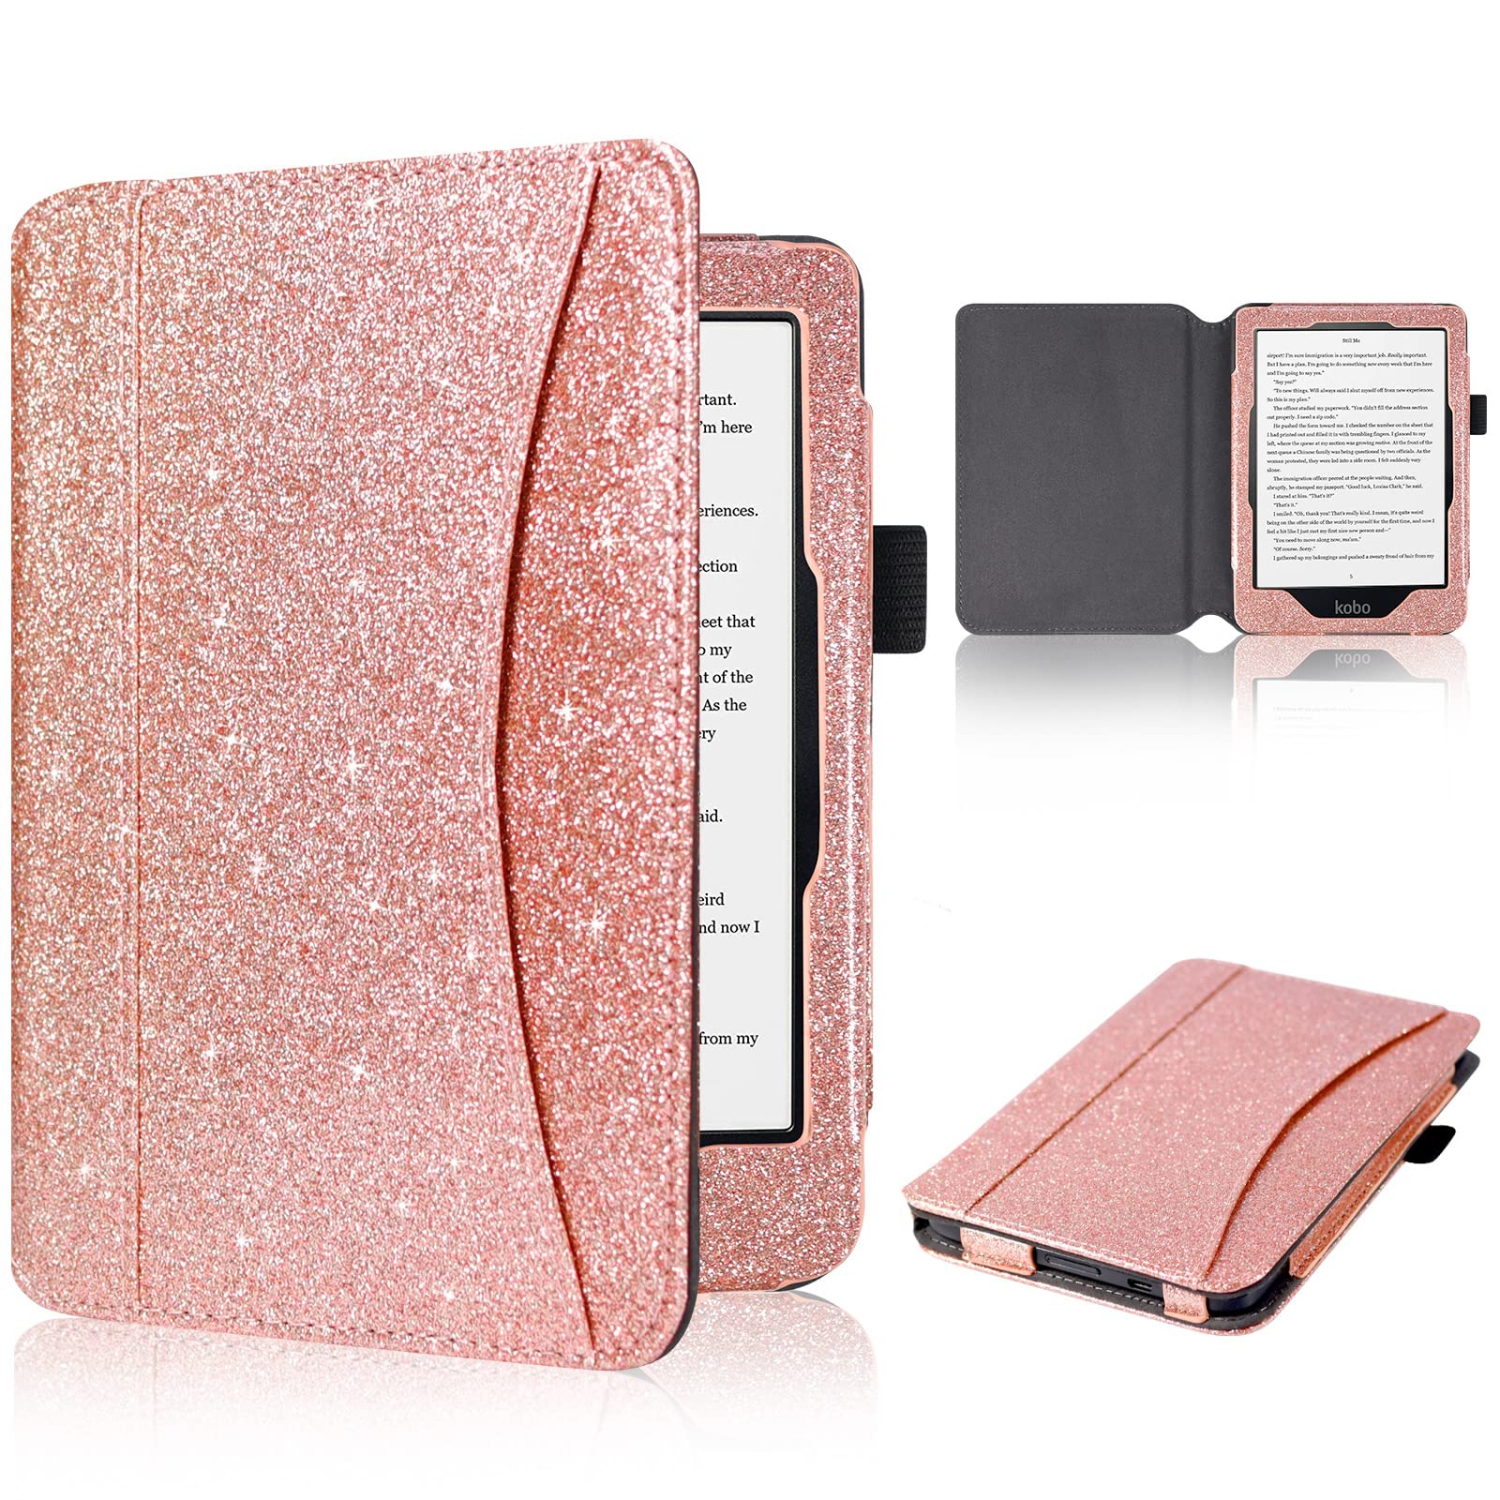 Gylint Premium Leather Business Slim Folding Stand Folio Cover with Auto Wake/Sleep Multiple Viewing Angles for Kobo Ereader Clara HD 6.0i Tablet Kobo Ereader Clara HD Case Baby Pink 